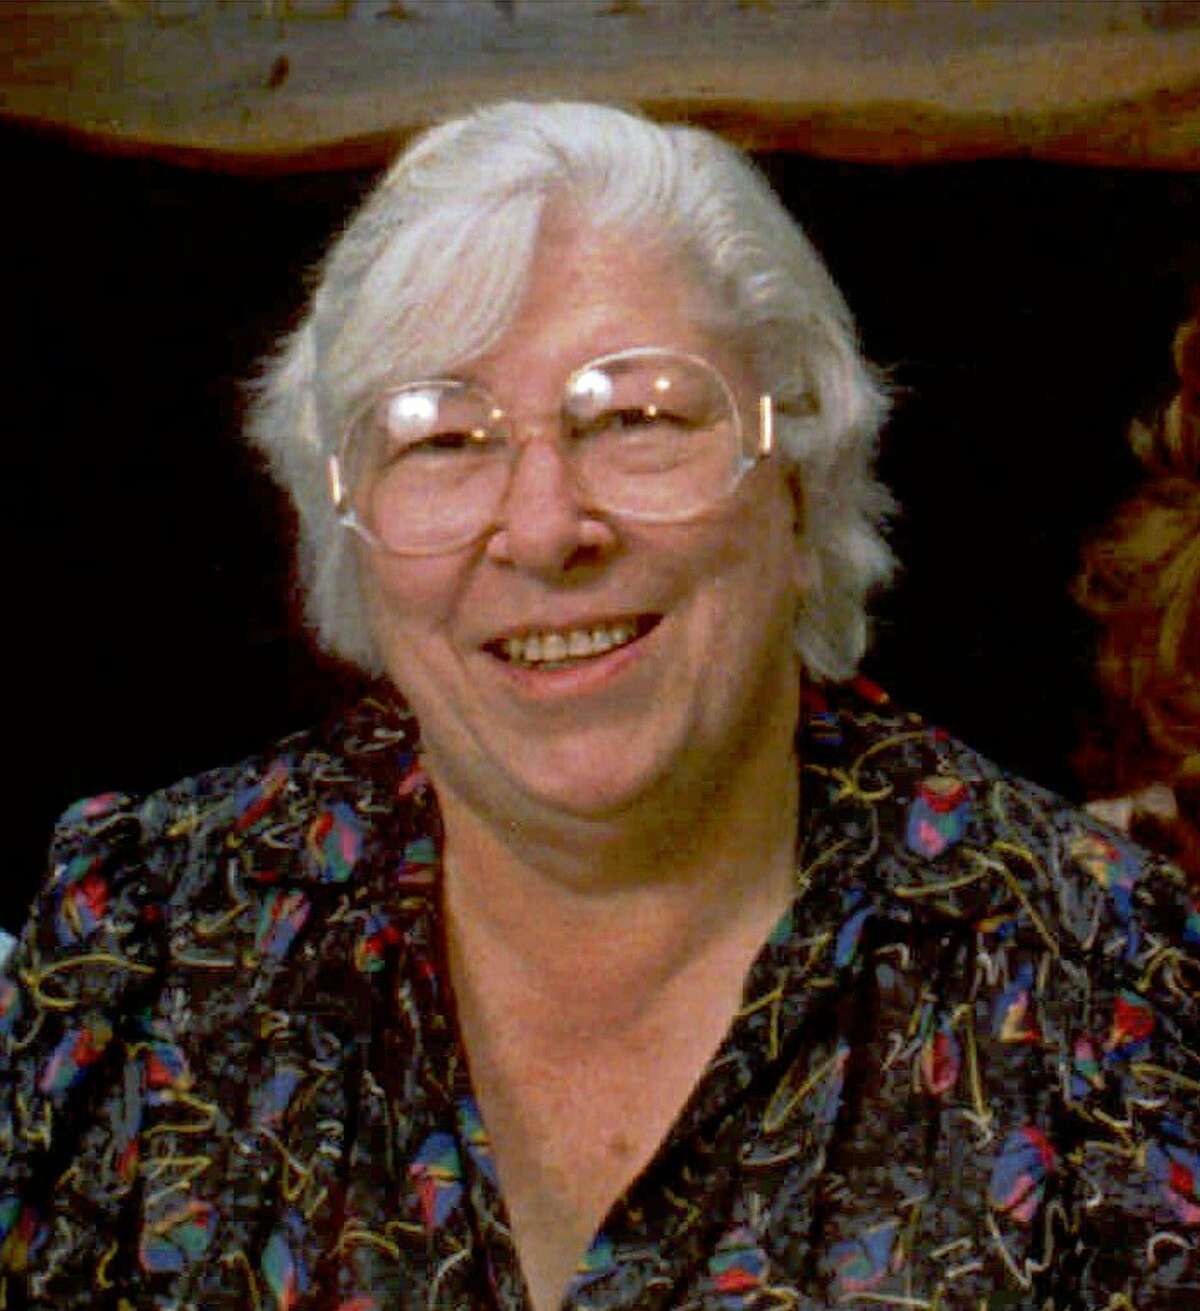 FILE--Atheist Madalyn Murray O'Hair is shown in Austin, Texas, in this June 1988 file photo. David R. Waters, 52, who authorities say killed Madalyn Murray O'Hair, her son and granddaughter out of hatred and greed, pleaded guilty Thursday to two federal weapons charges unrelated to the atheist leader's disappearance. (AP Photo/David Breslauer, File) HOUCHRON CAPTION (08/23/1998)(05/28/1999)(03/03/2000): O'Hair. HOUCHRON CAPTION (05/30/2000): Madalyn Murray O'Hair was reportedly seen at a restaurant in Romania in November 1997.